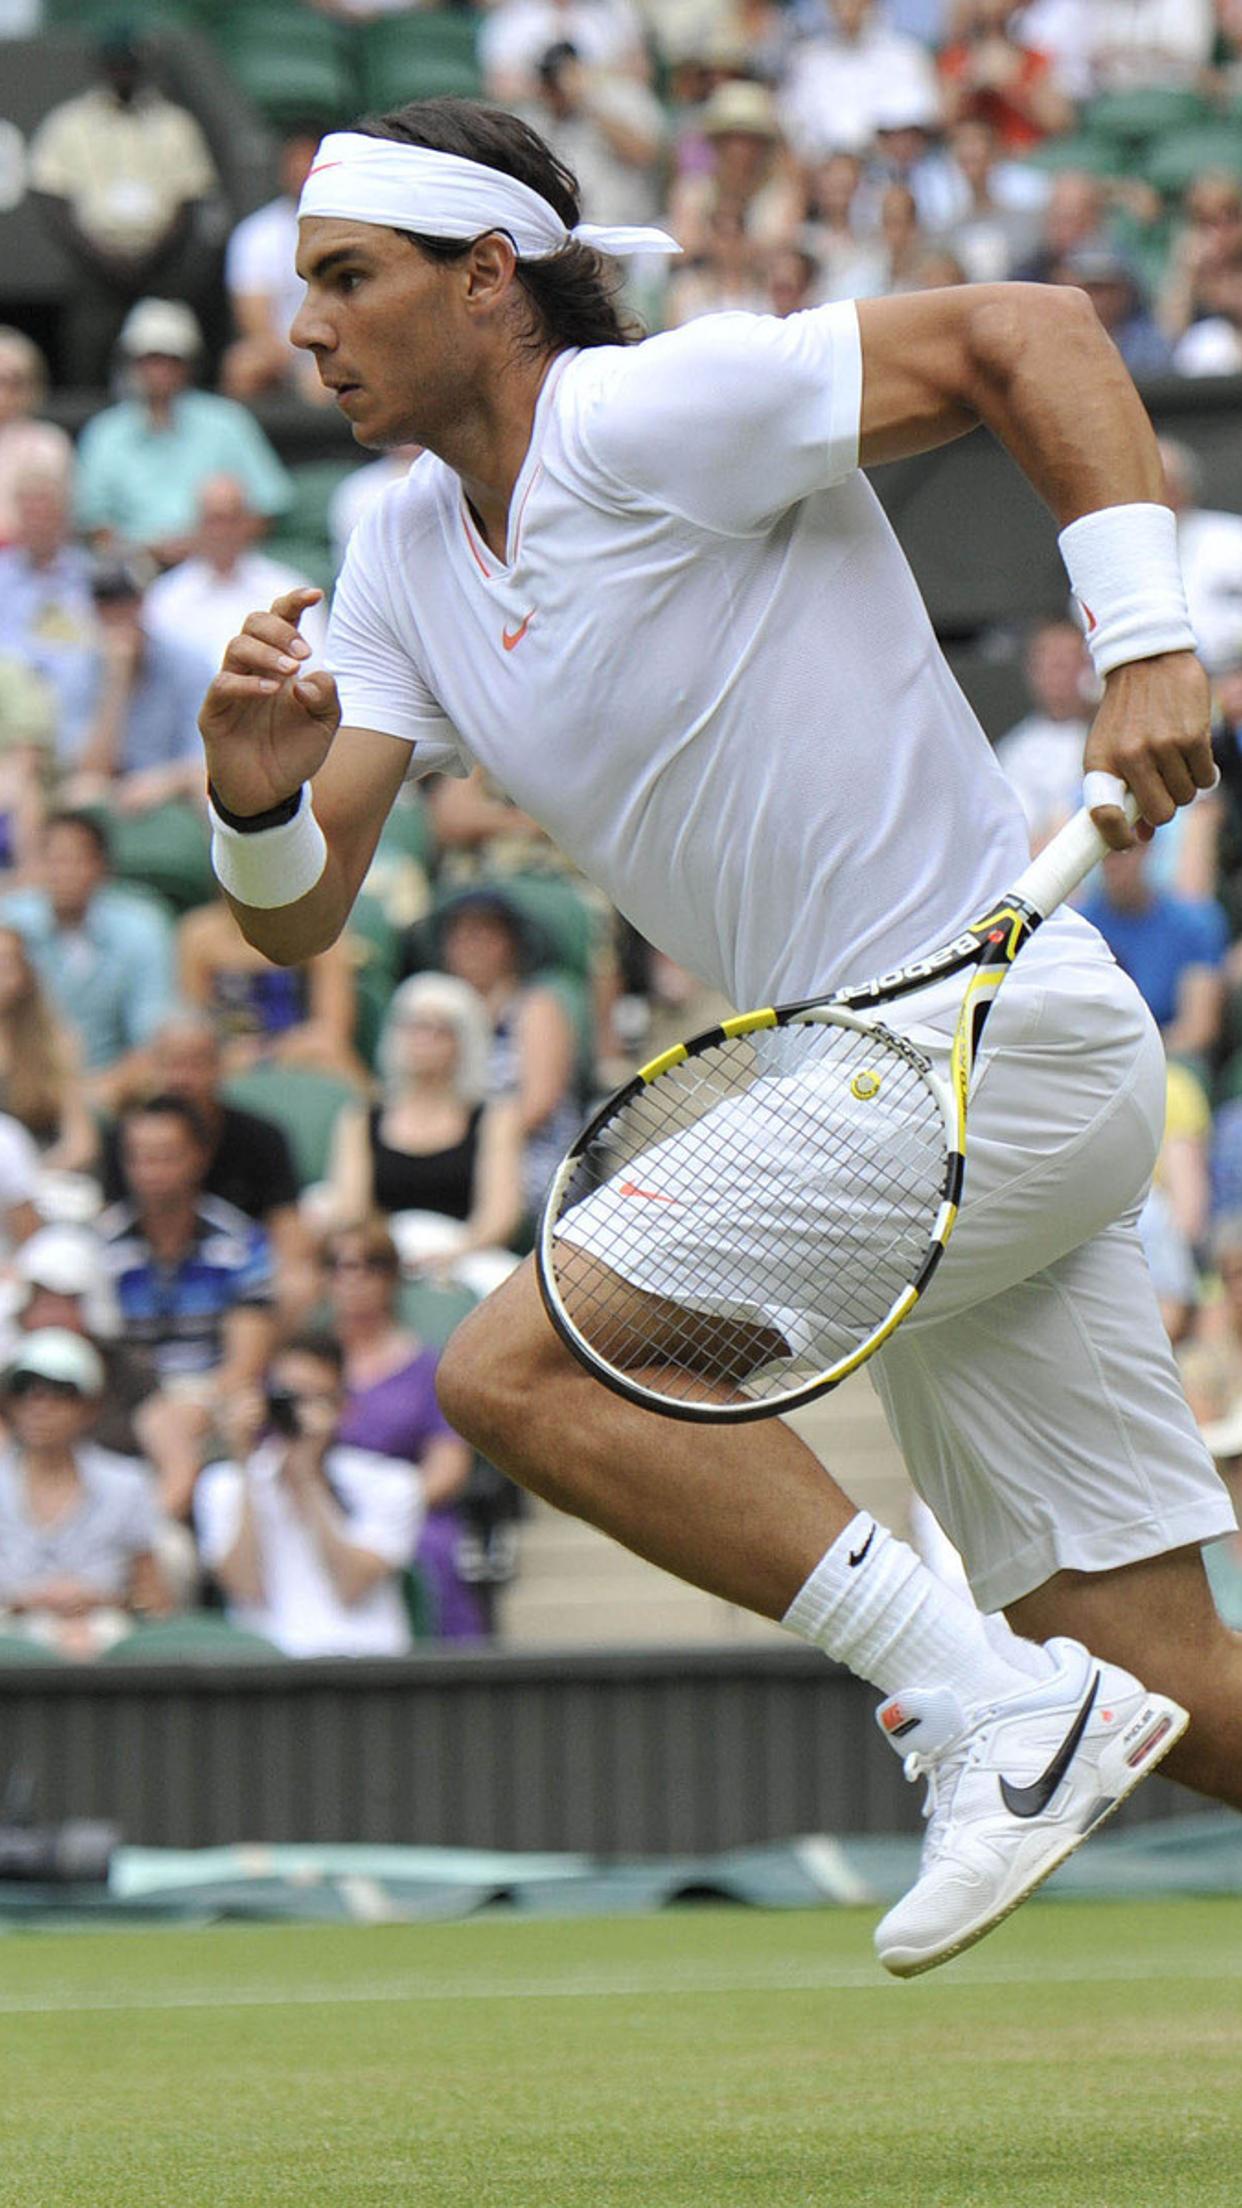 Rafael Nadal in the middle of the game of tennis